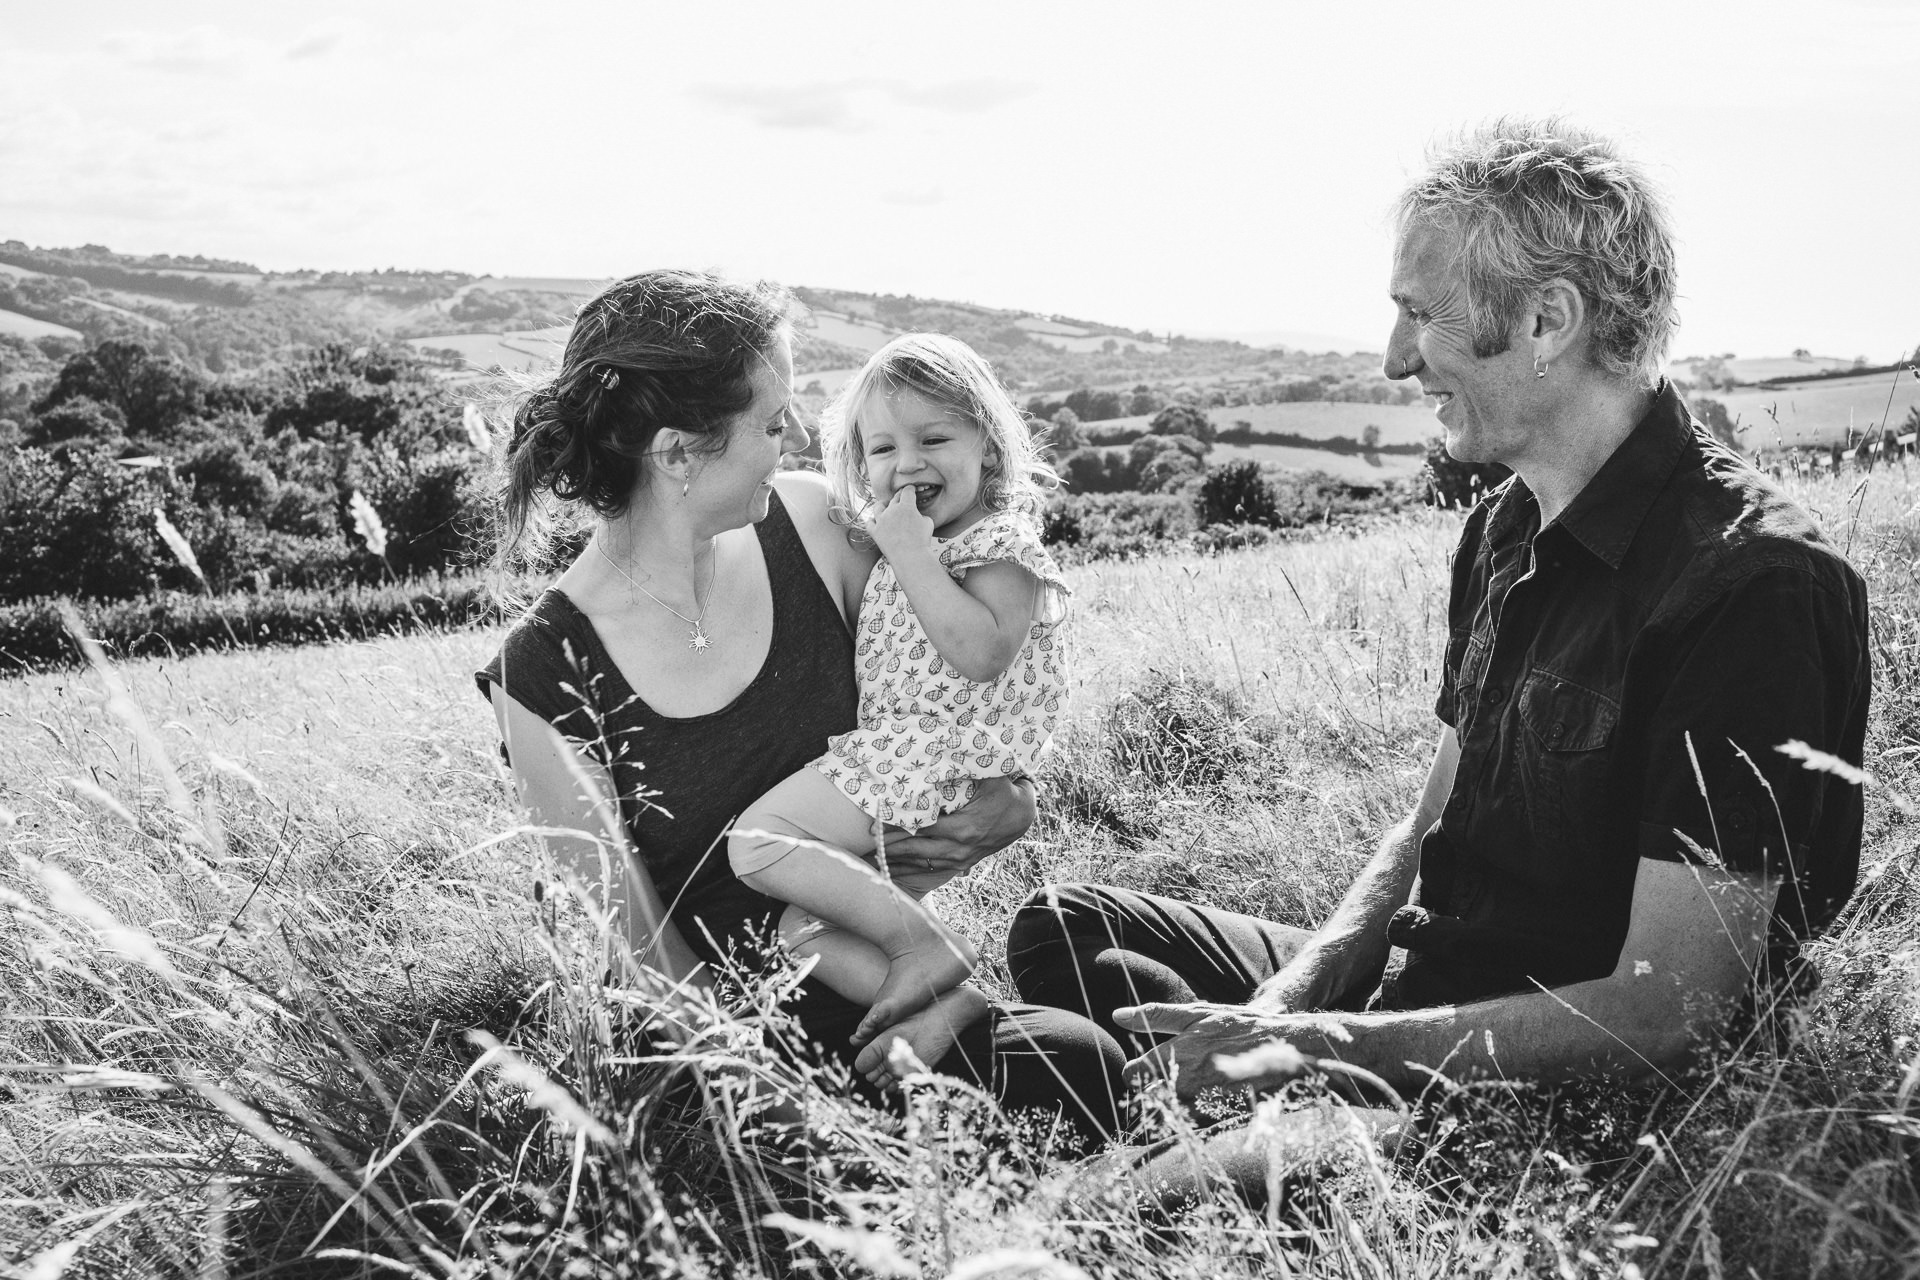 Two parents with a young daughter cuddling together in a field